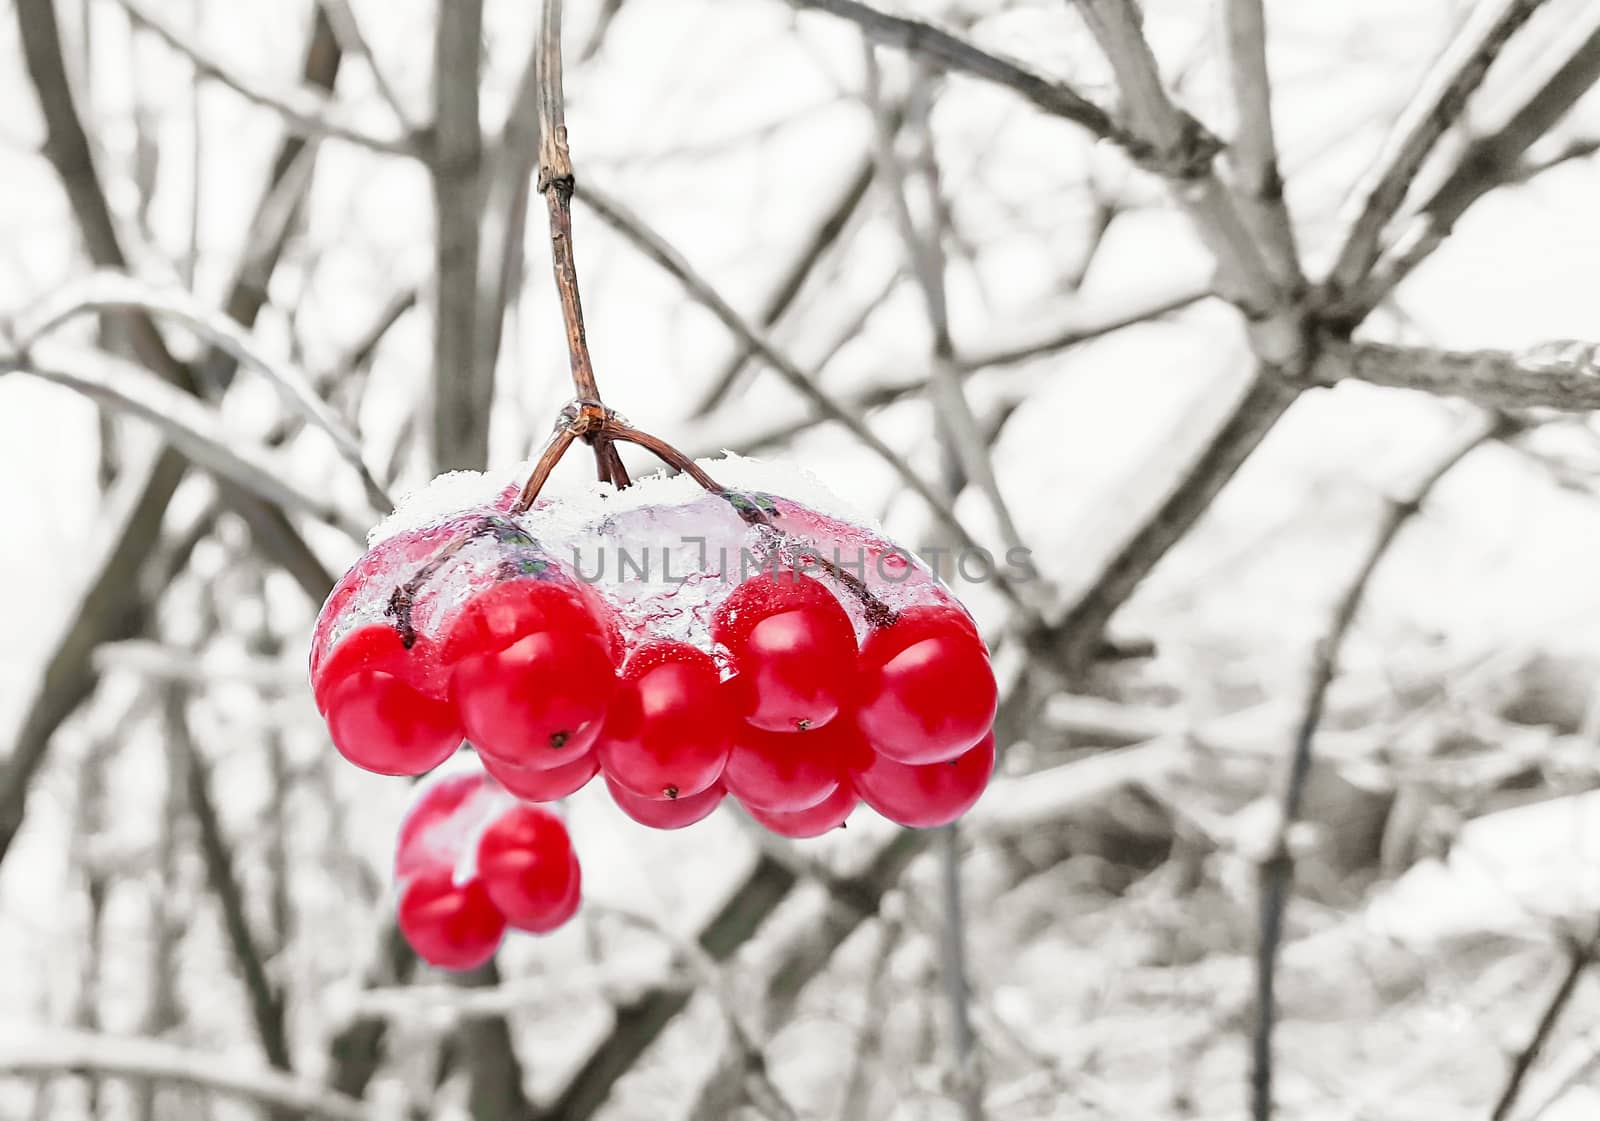 Viburnum branch with red berries in snow. Nature